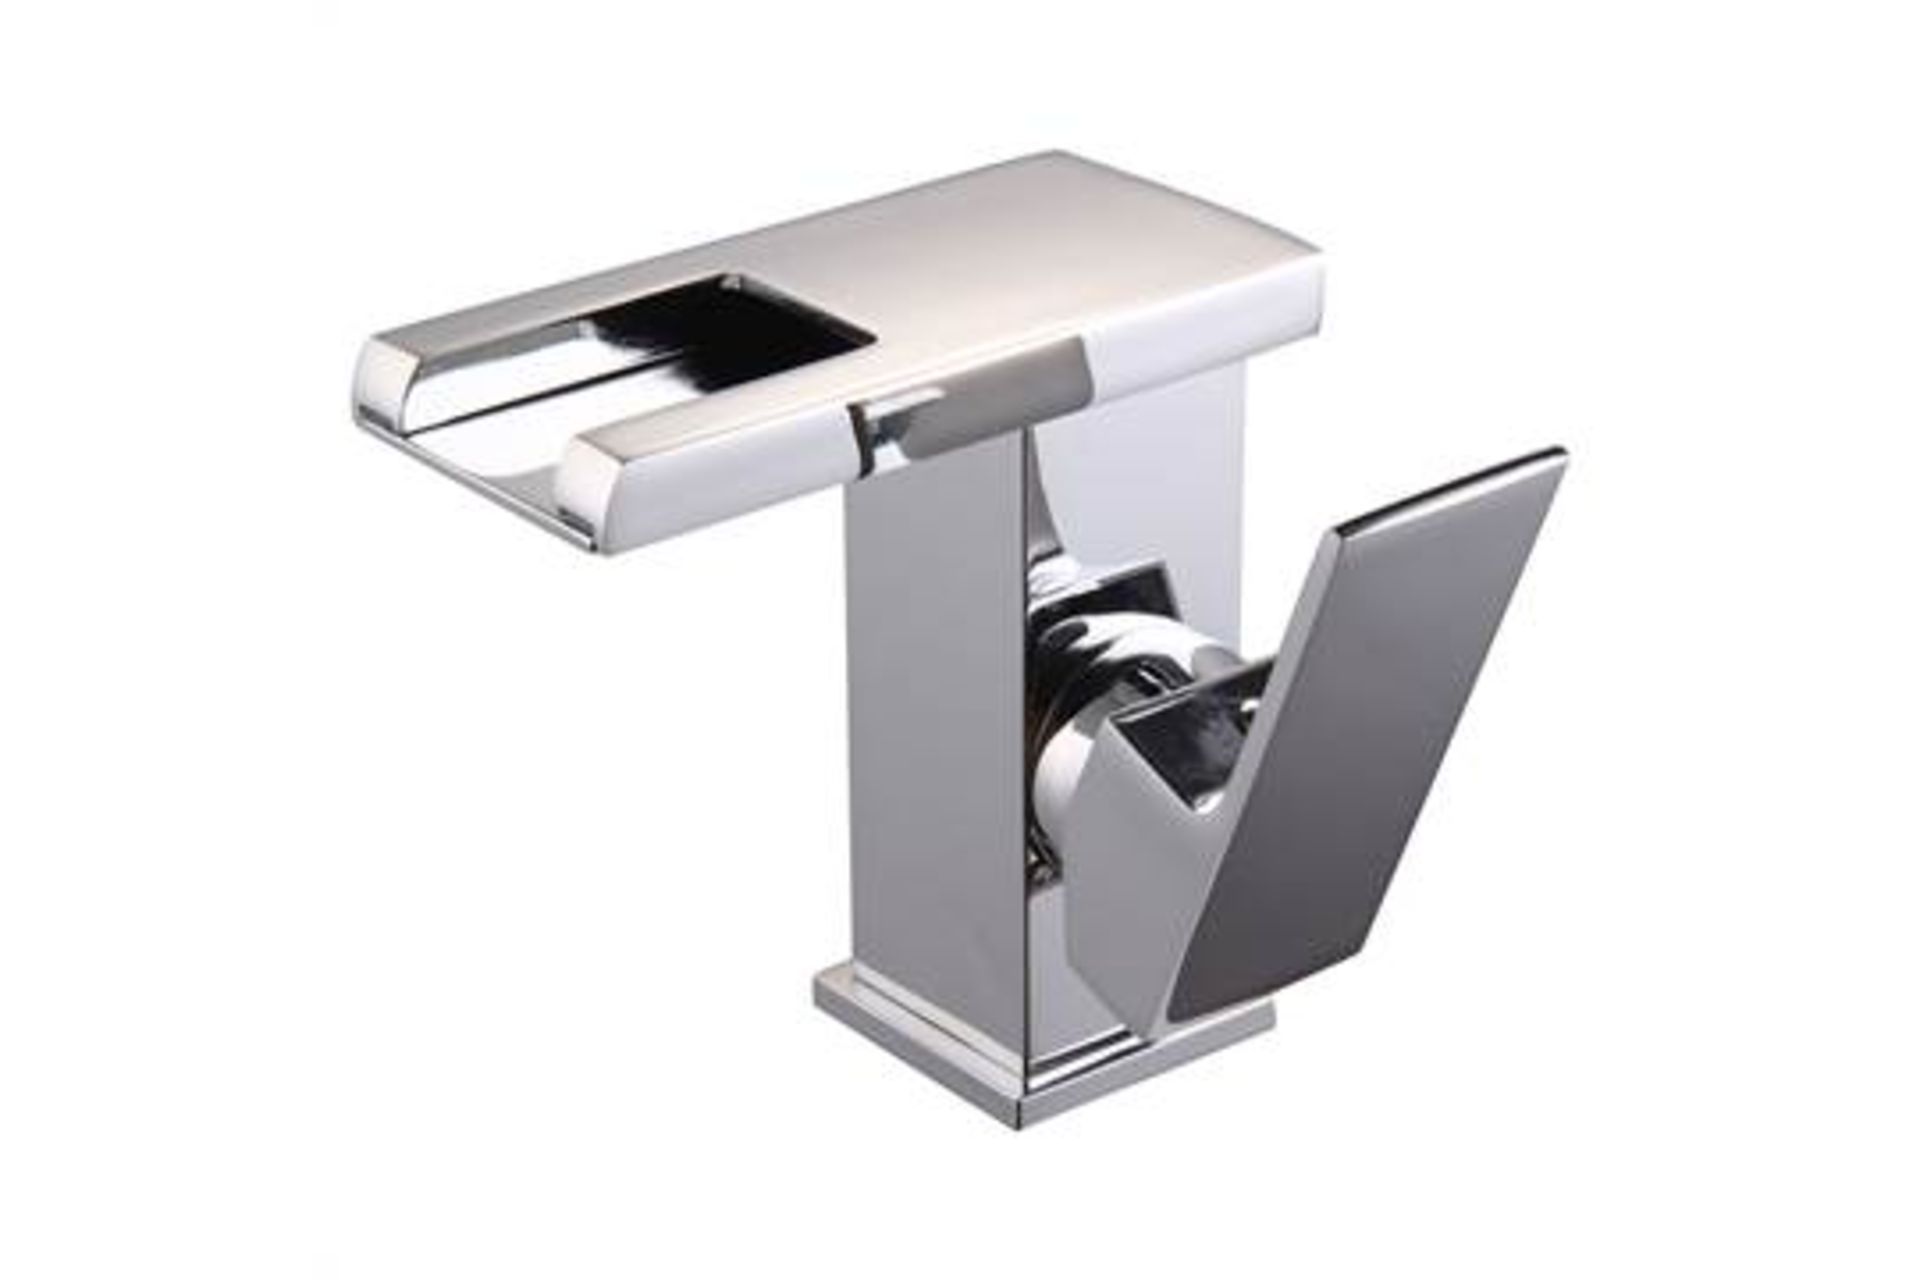 (P270) LED Waterfall Bathroom Basin Mixer Tap. RRP £229.99. Easy to install and clean. All copper - Image 2 of 3